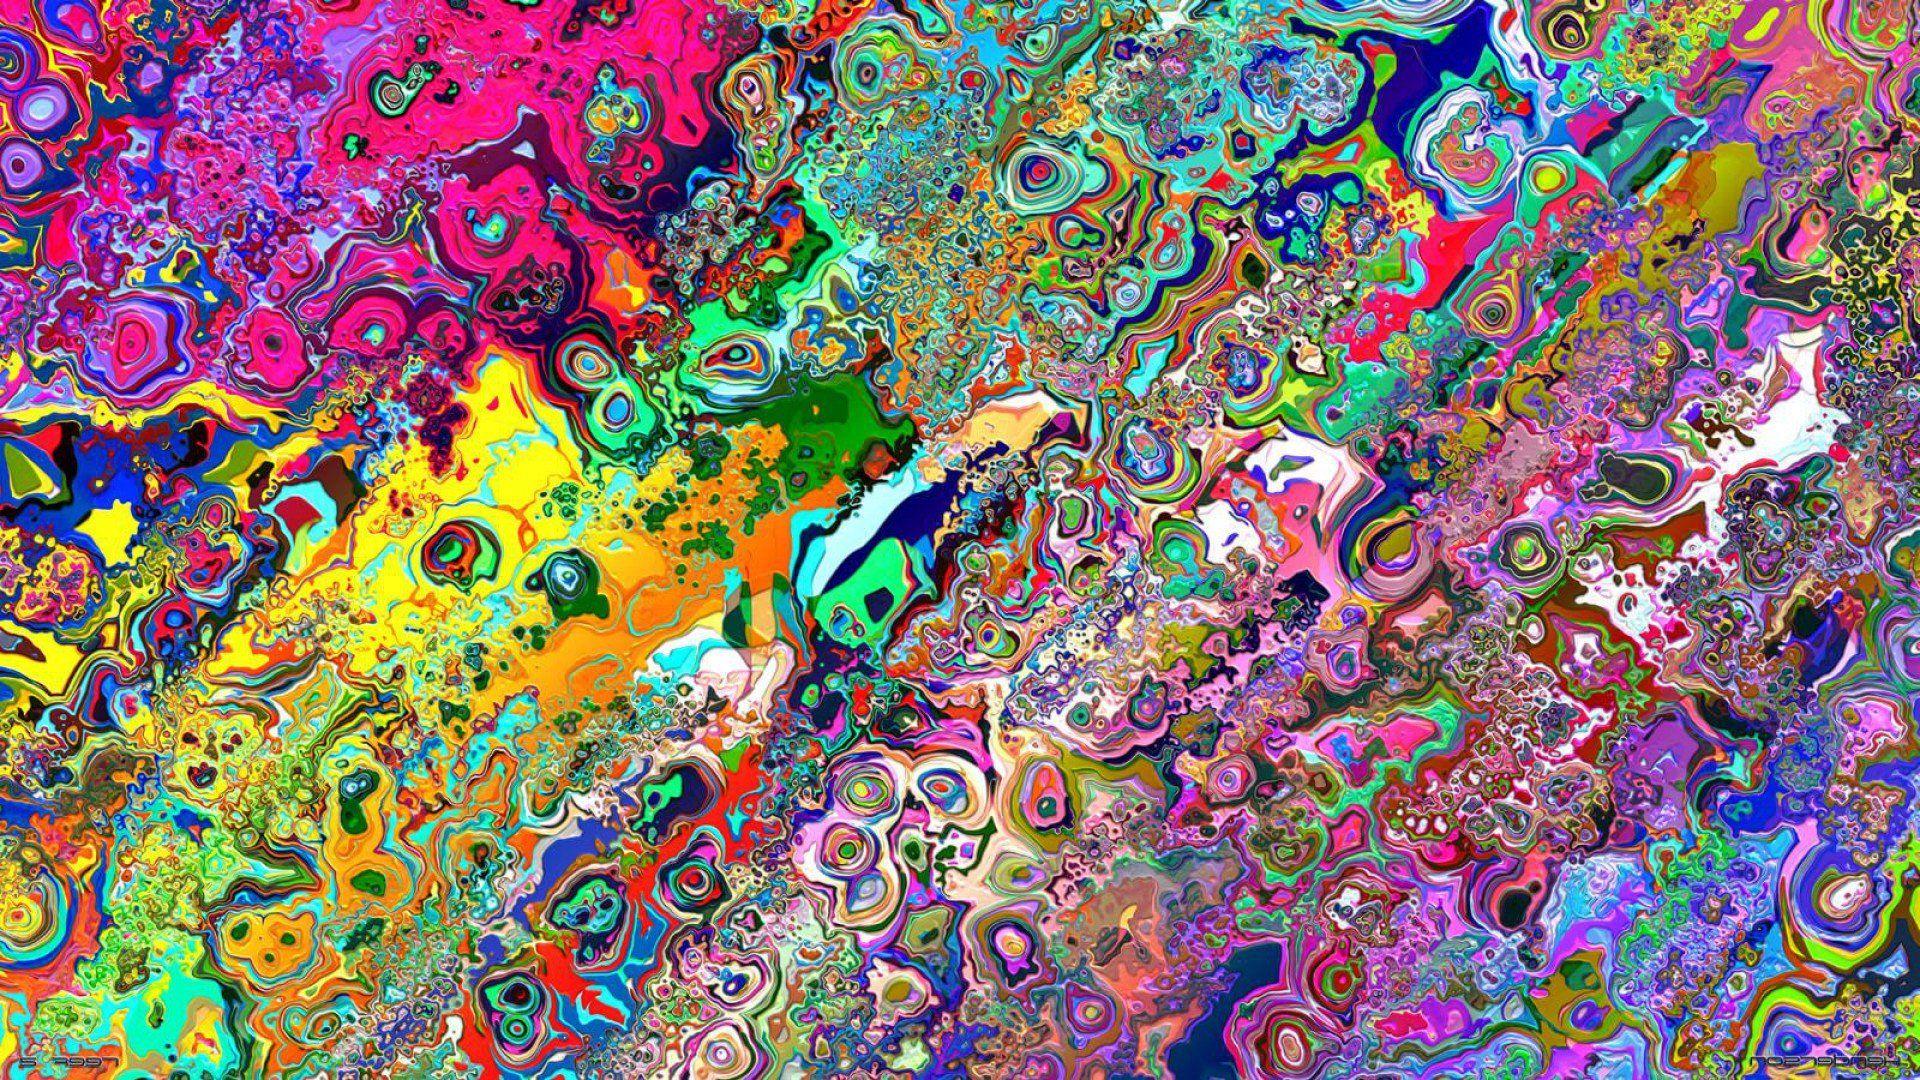 Psychedelic Wallpaper Colorful Trippy Mobile HD Pics For Phones Cool